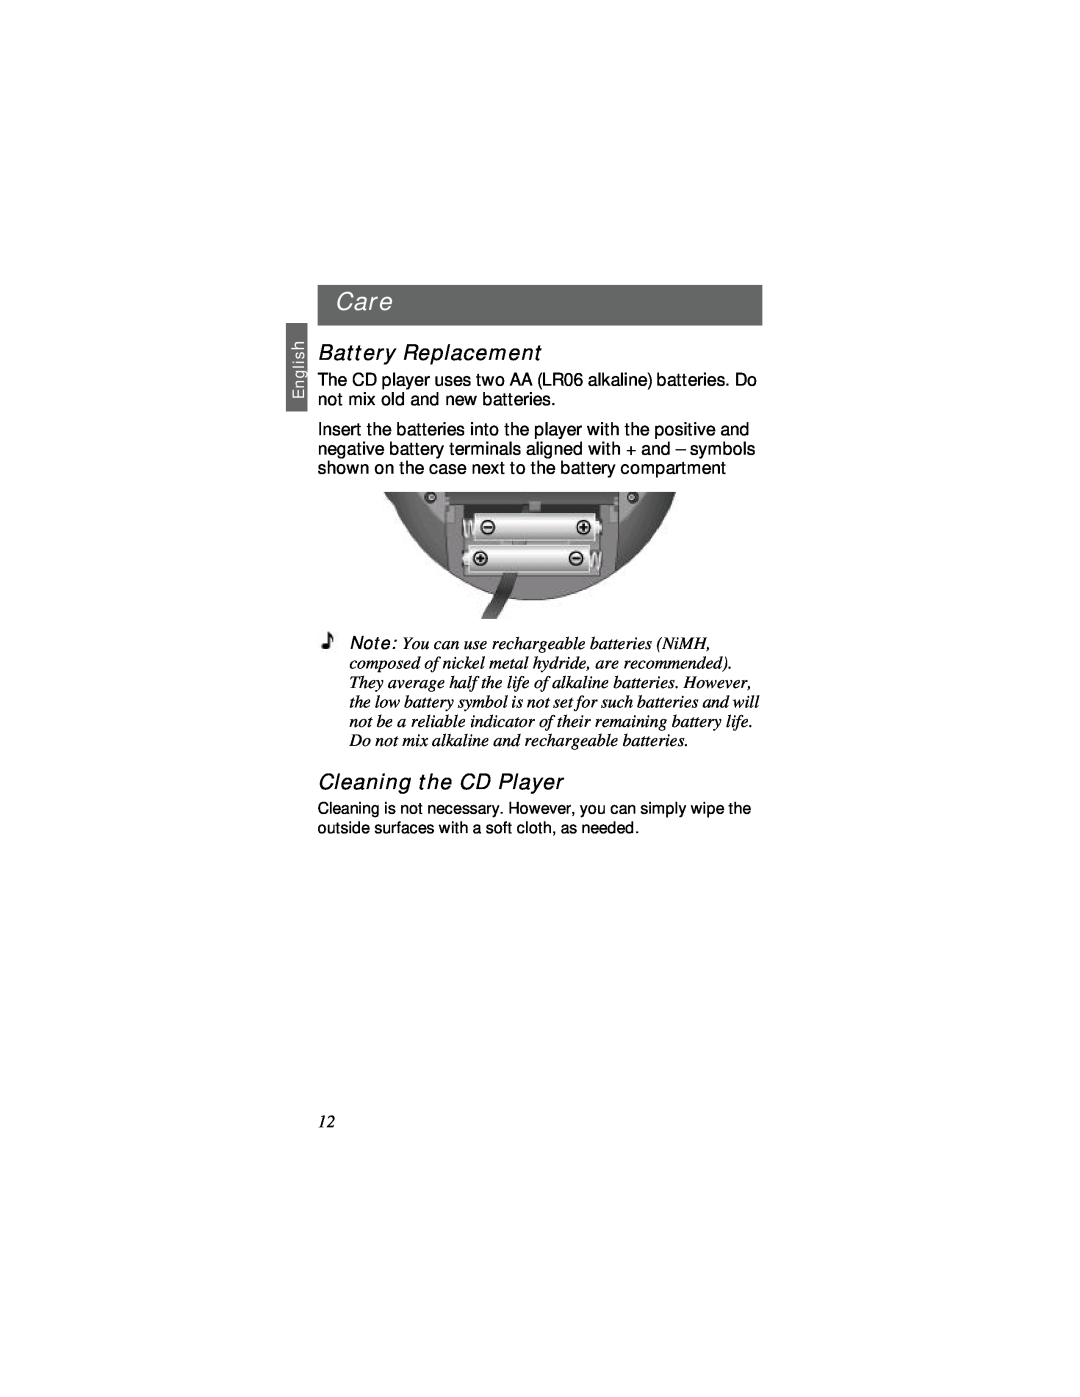 Bose SM1 manual Care, Battery Replacement, Cleaning the CD Player 